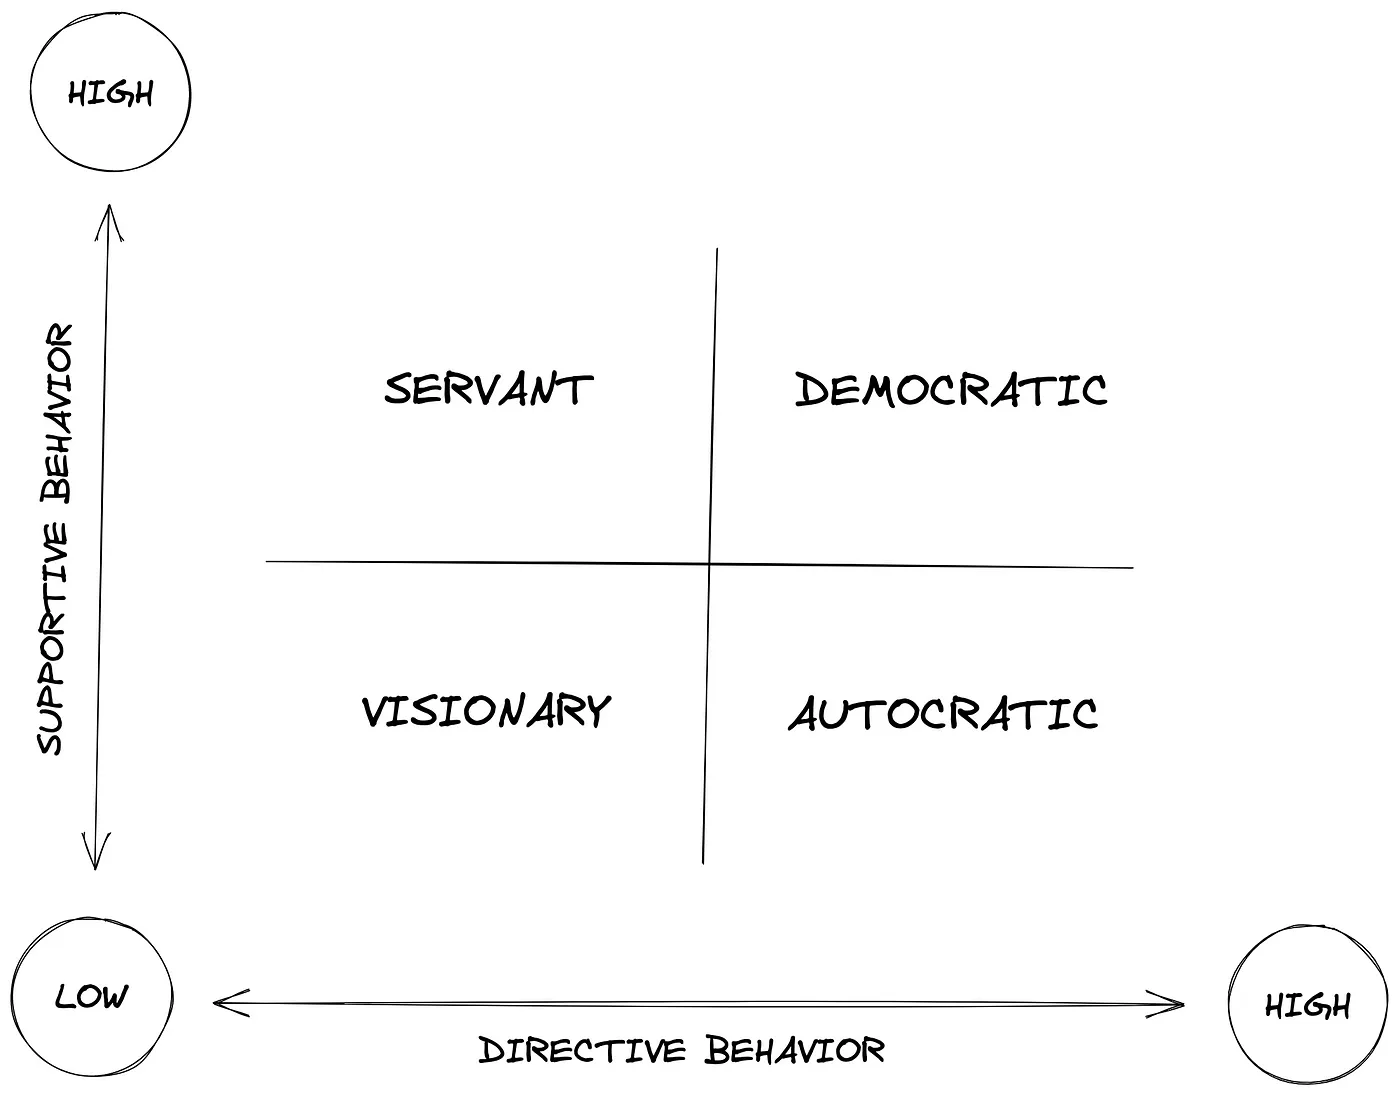 Supportive and directive behavior in different leadership styles